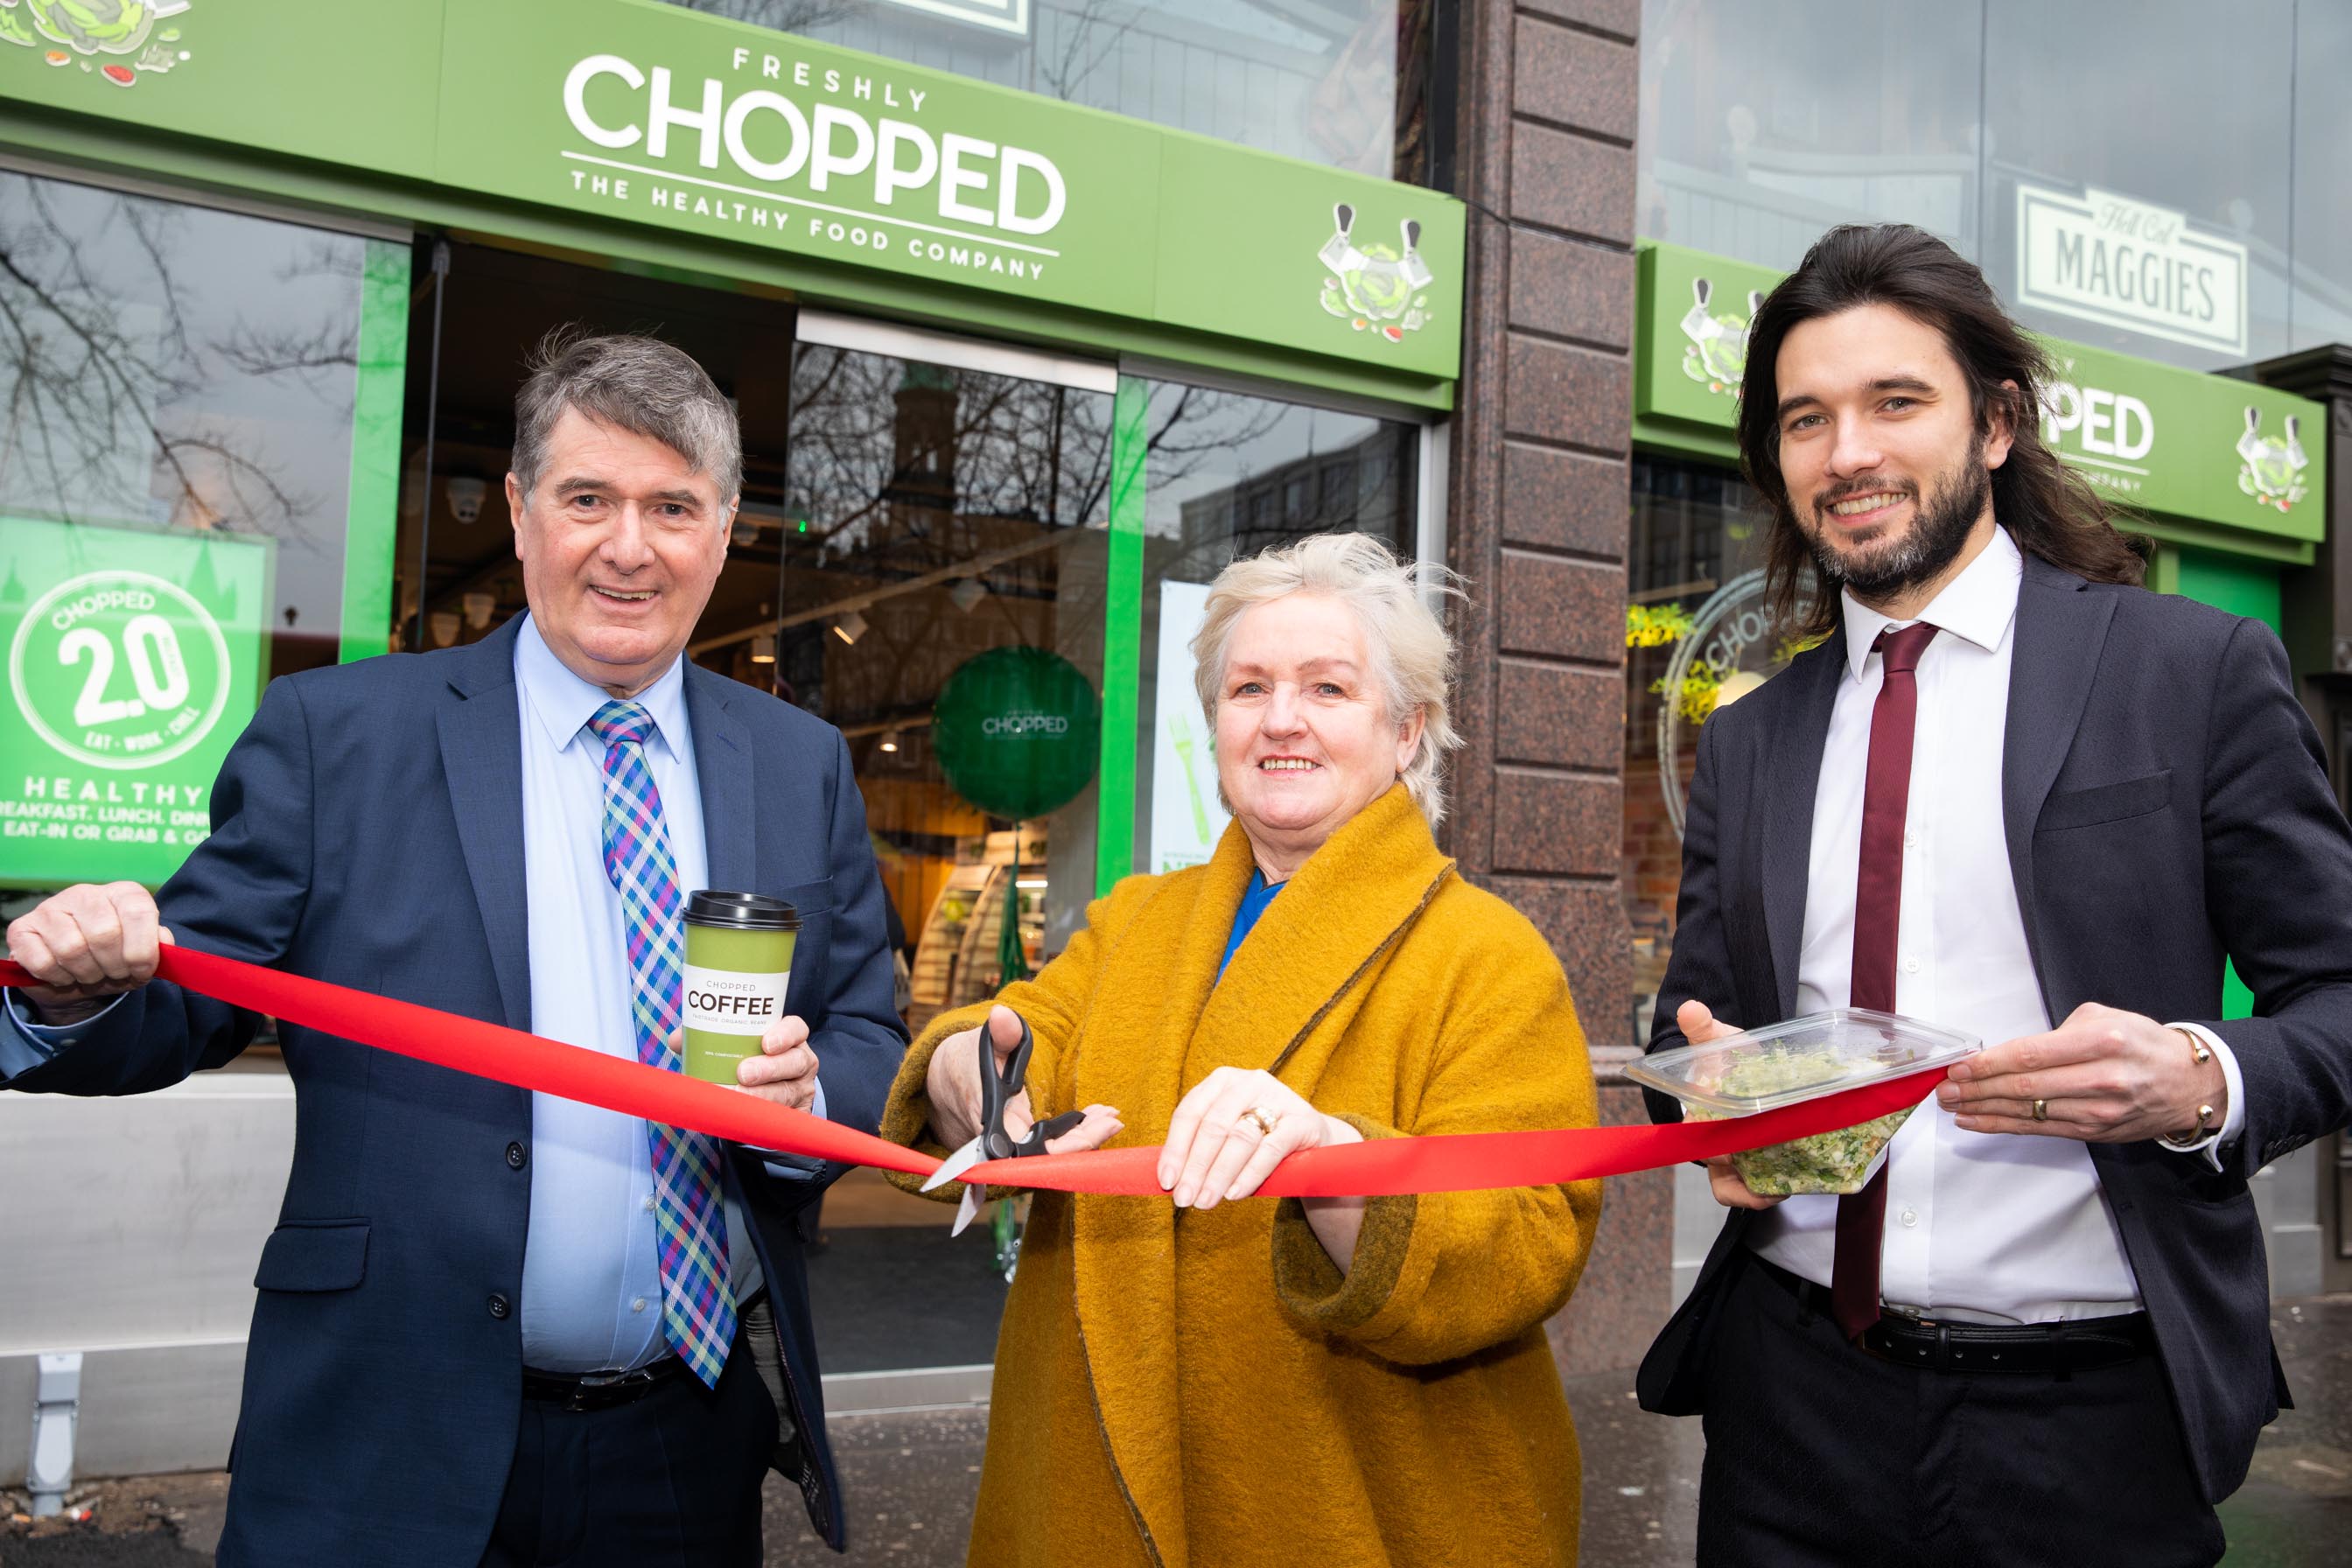 Flagship Freshly Chopped store opens with pledge to donate leftover food to city’s homeless